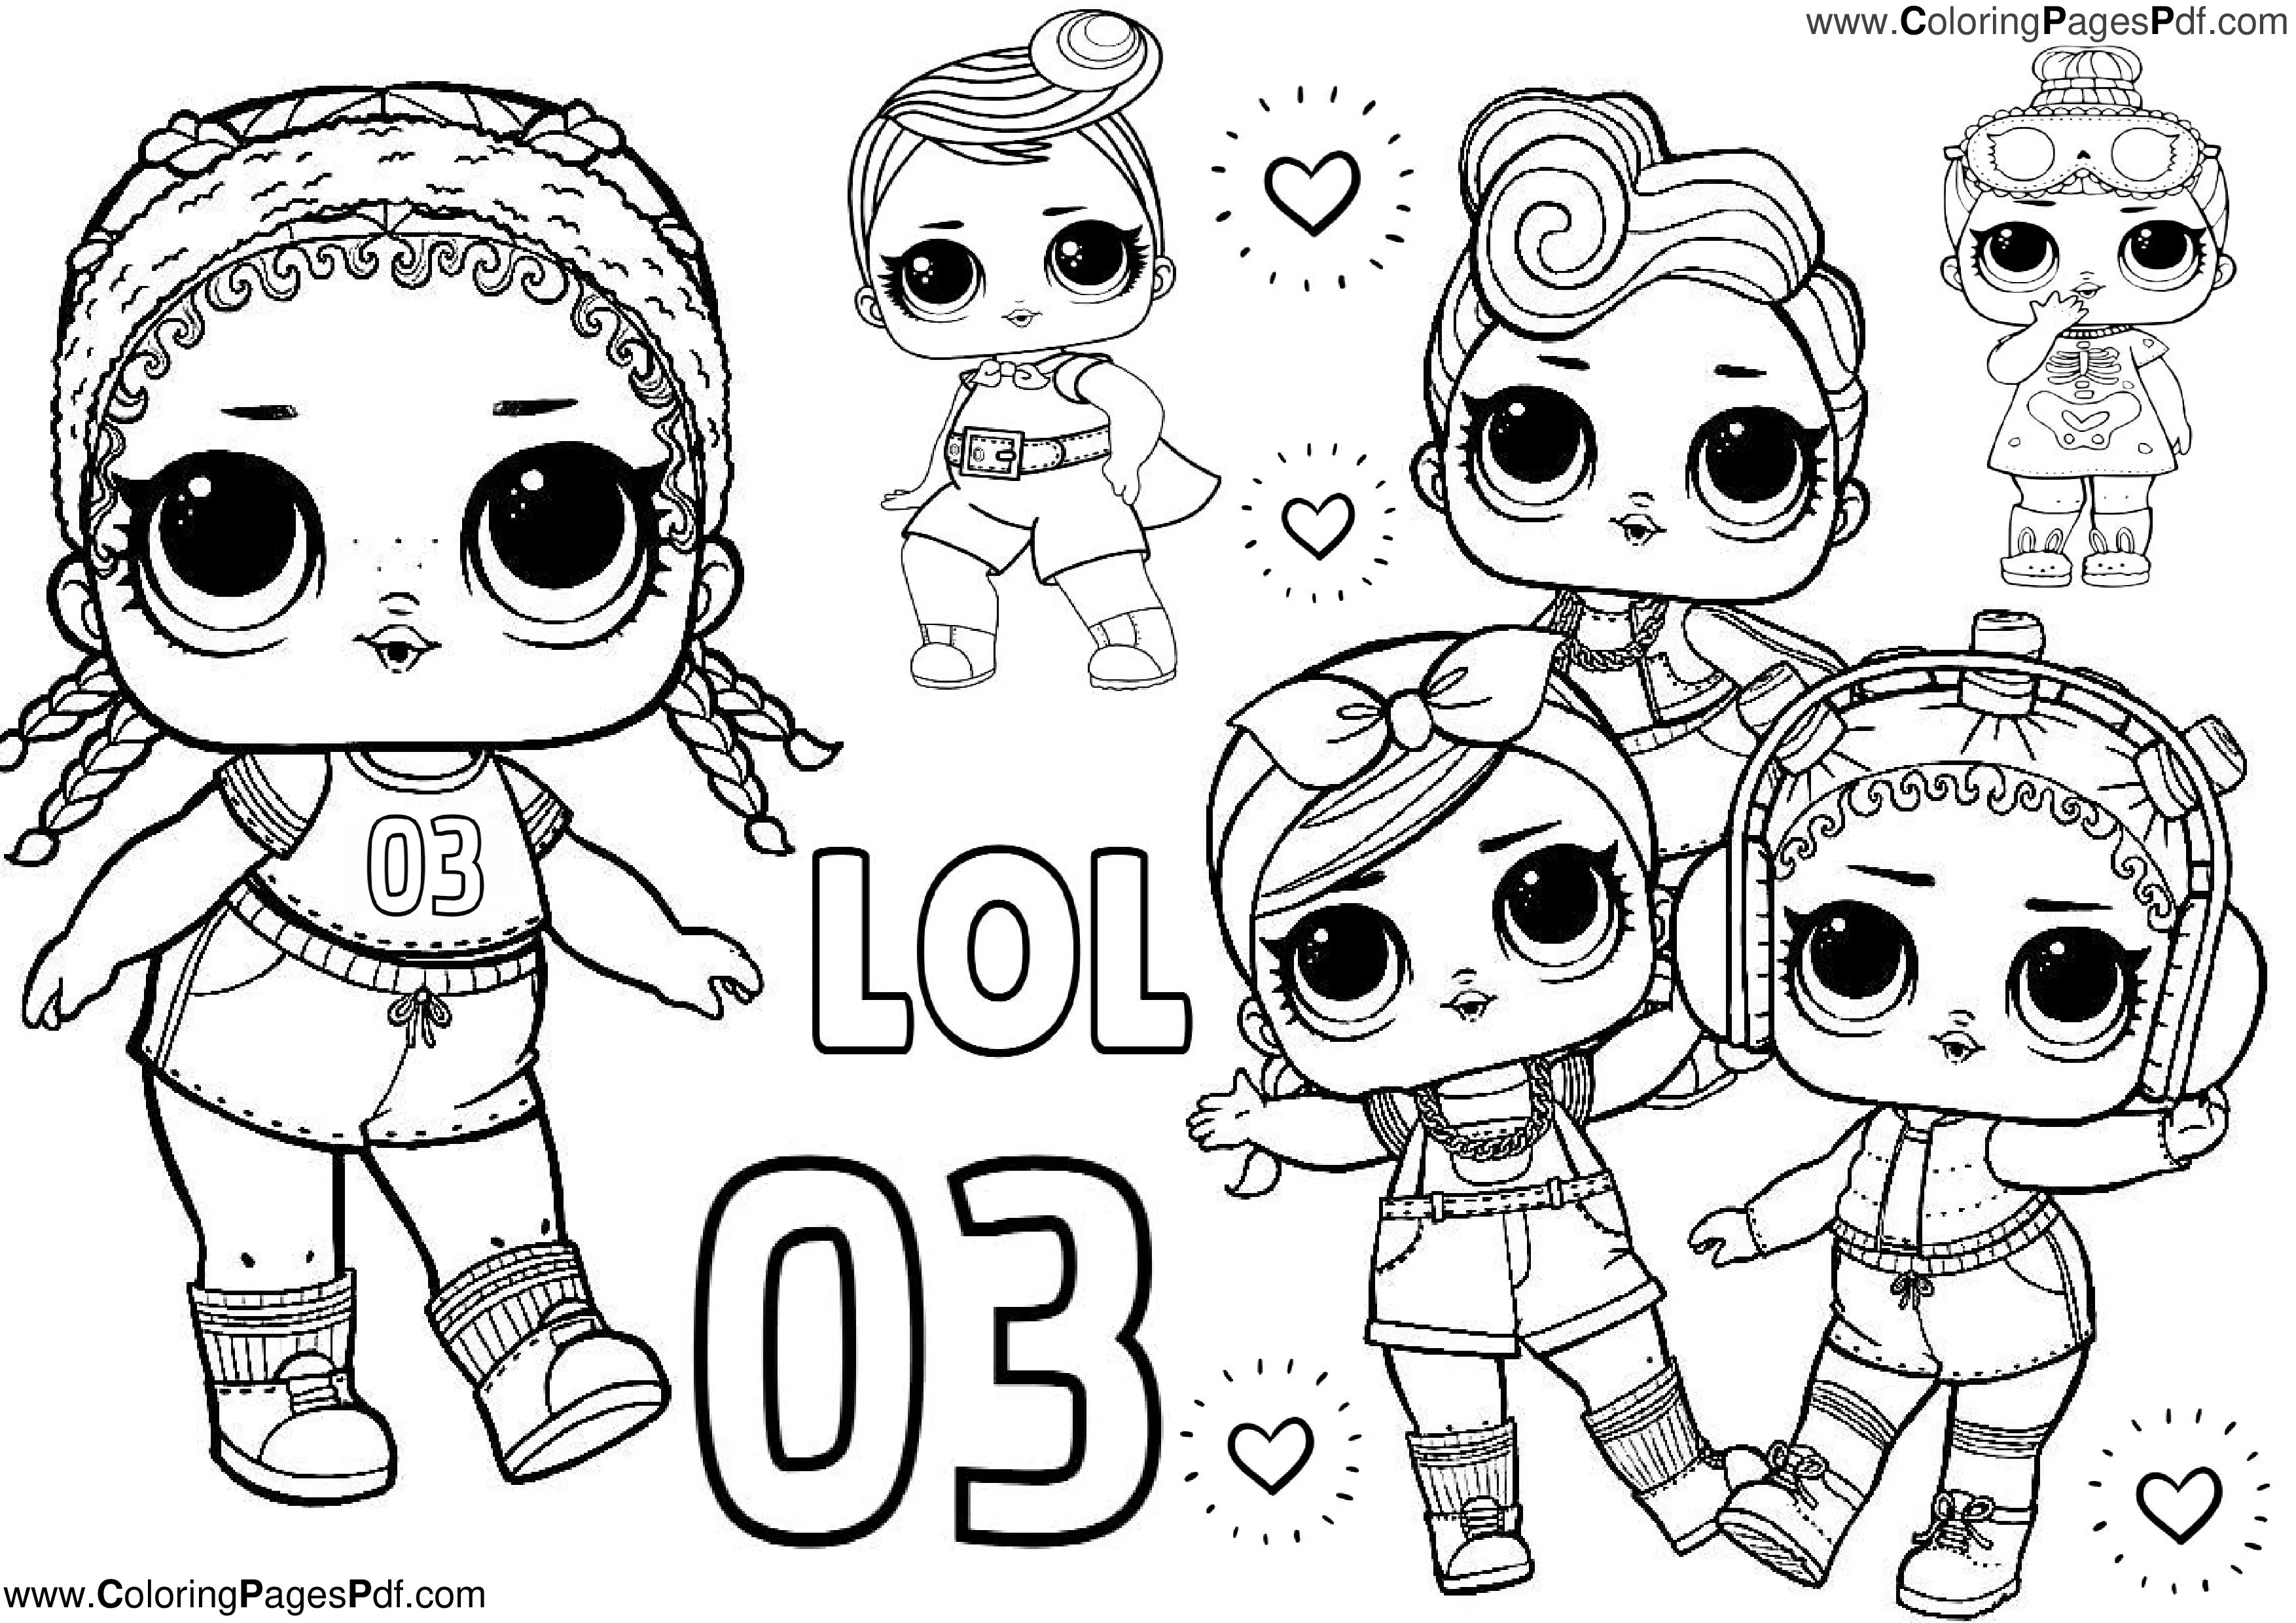 Lol coloring pages series 3